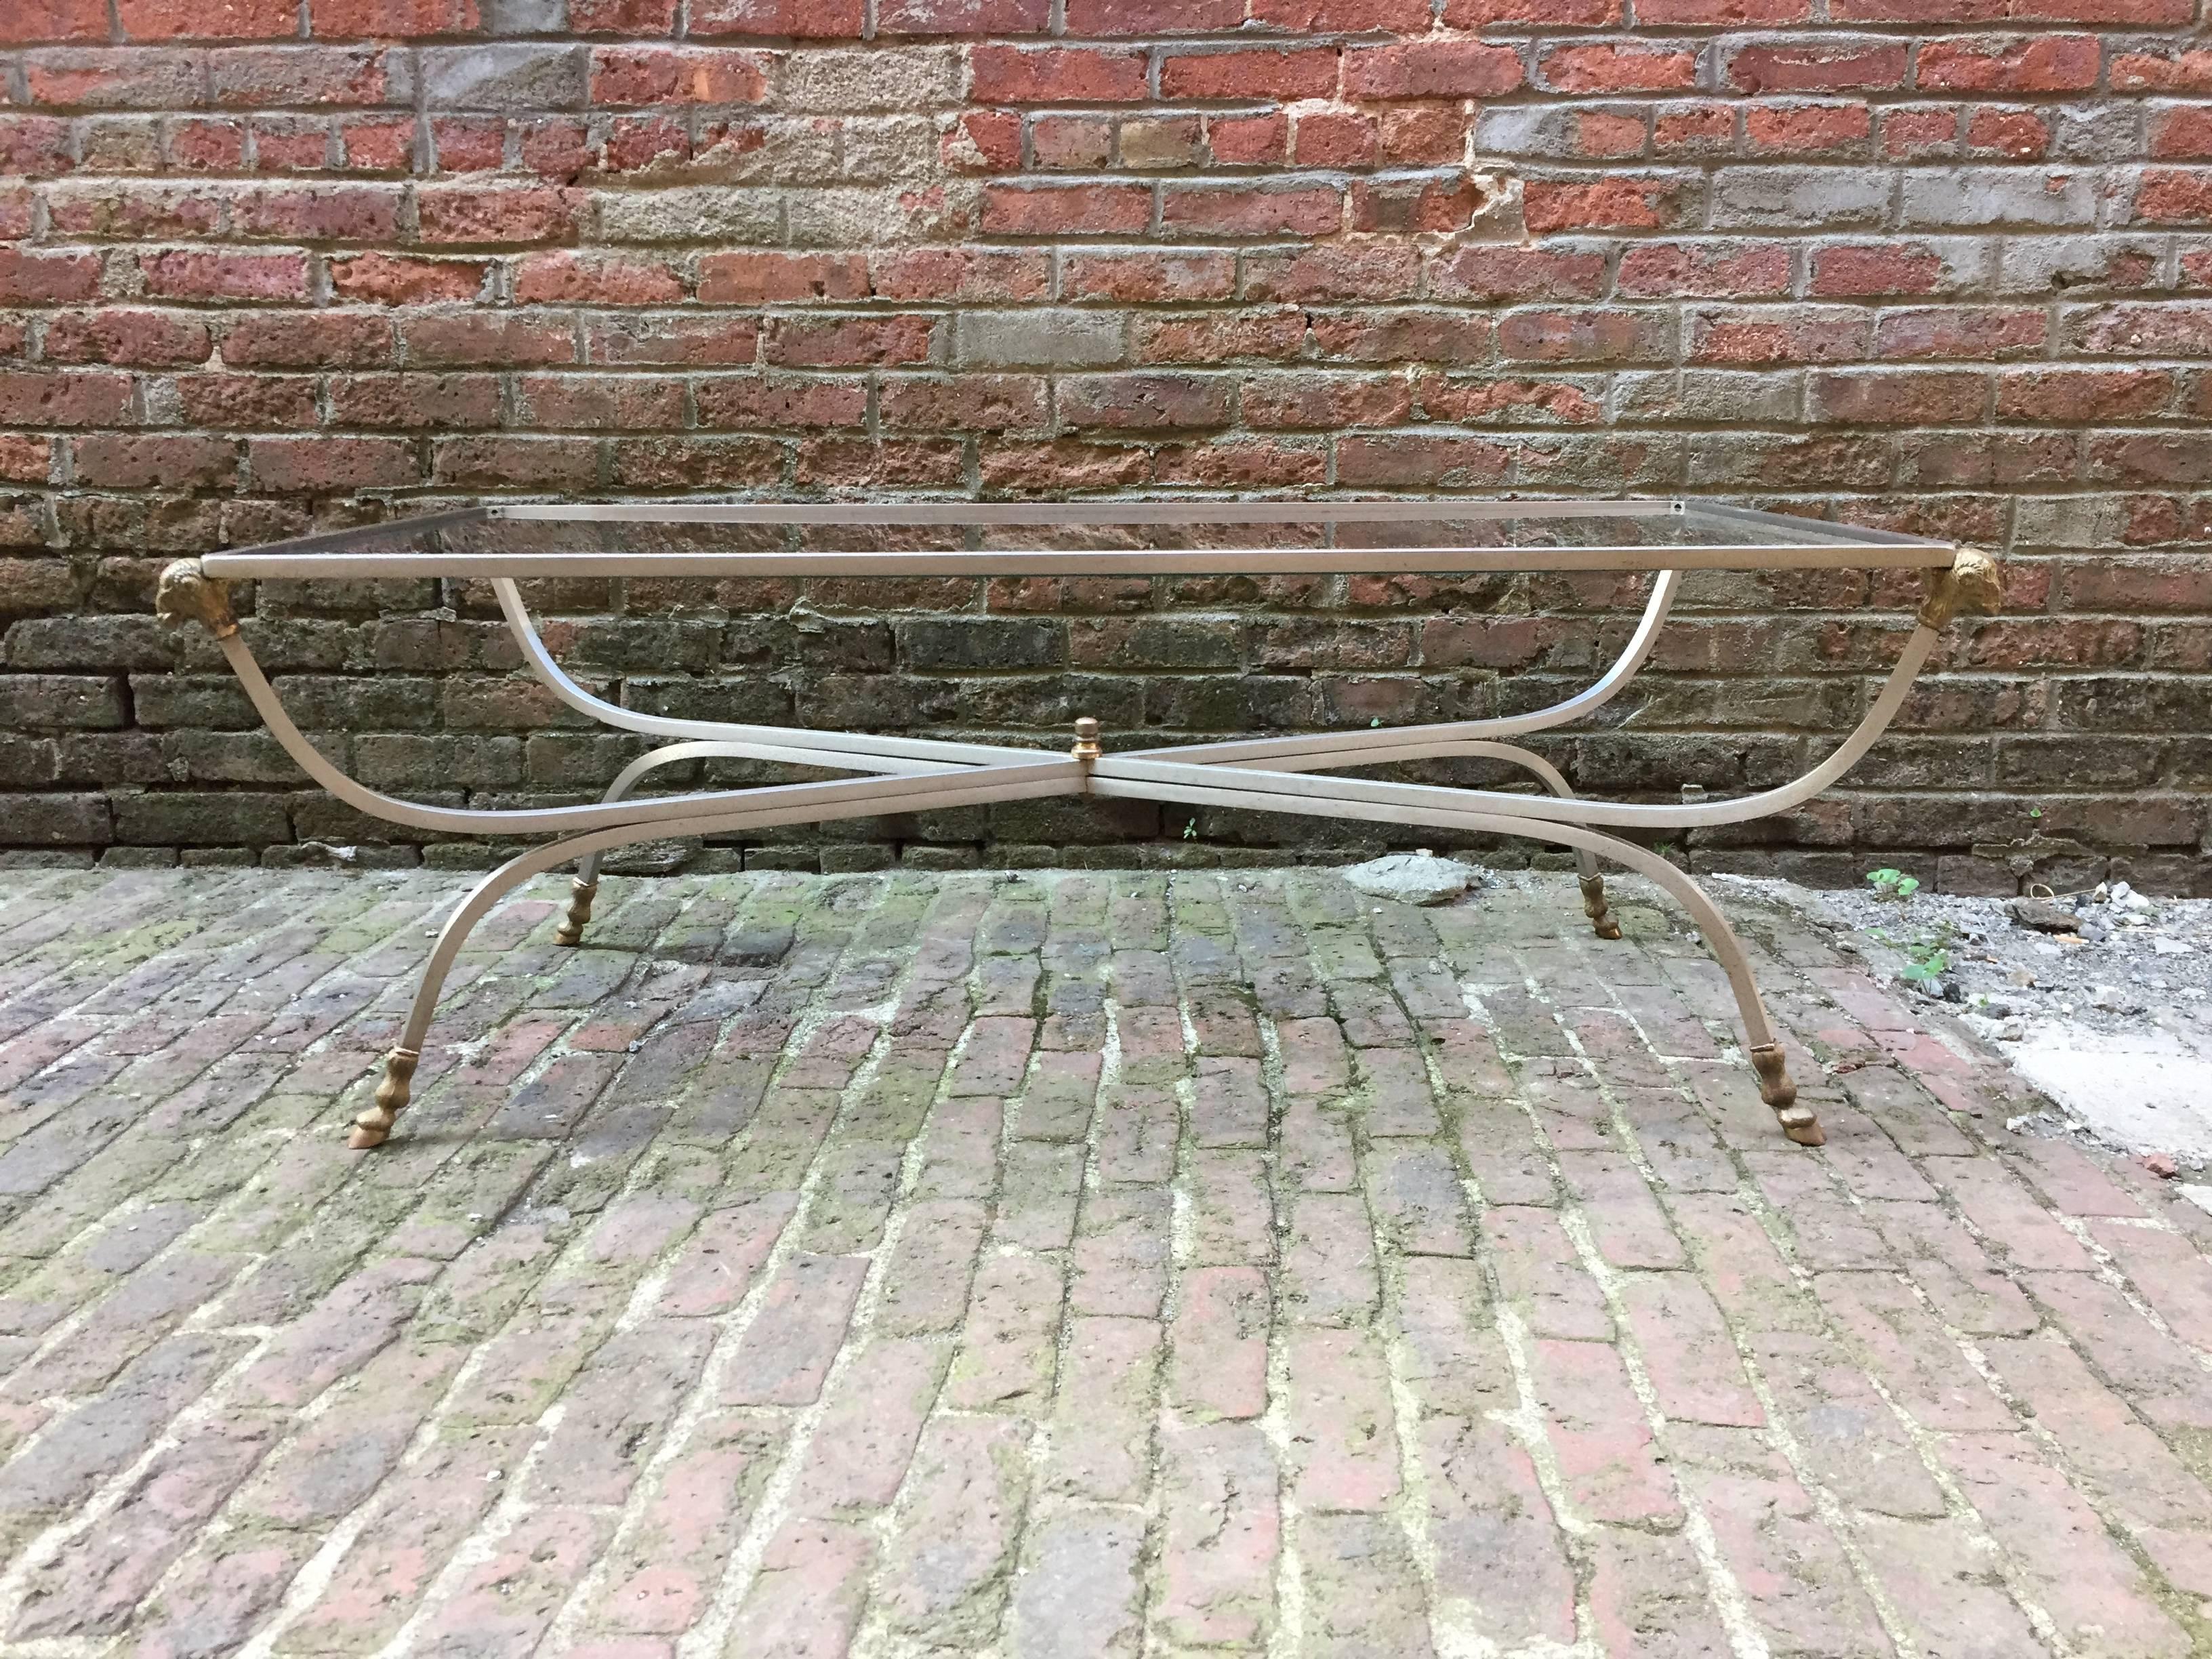 Elegant brass, steel and glass coffee table in the manner of Maison Jansen. Brass ram's head corners and cloven hoof feet. Signed, Italy, under foot. Original glass, circa 1970.

Measures: 17.5